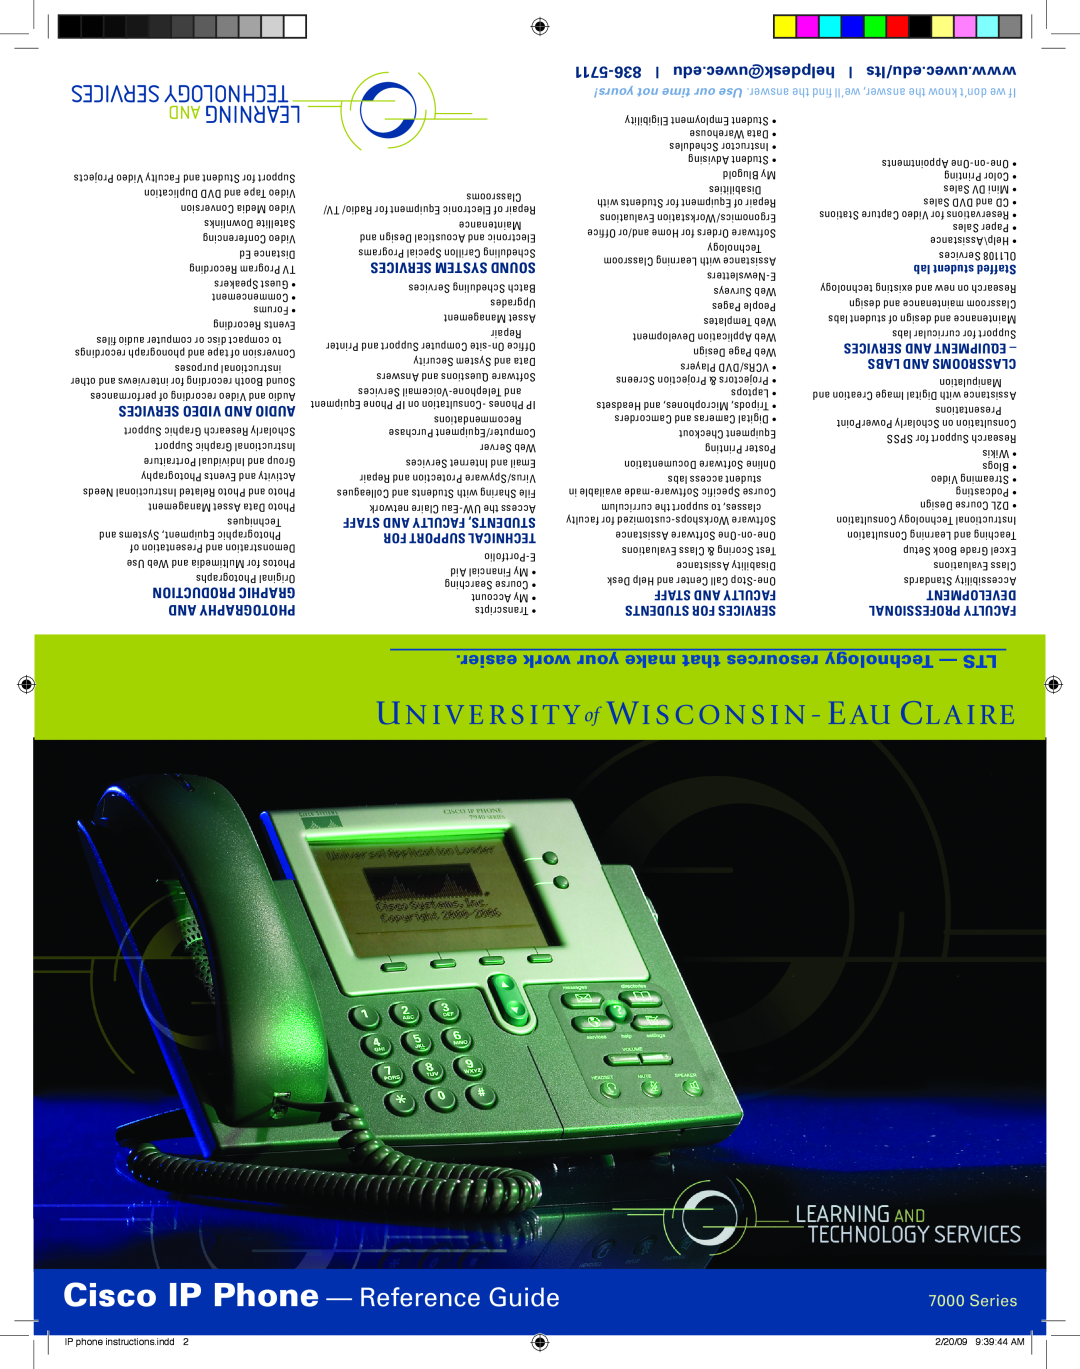 Cisco Systems 7000 manual Cisco iP Phone - Reference Guide, easier work your make that resources Technology - lTS, 5711-836 